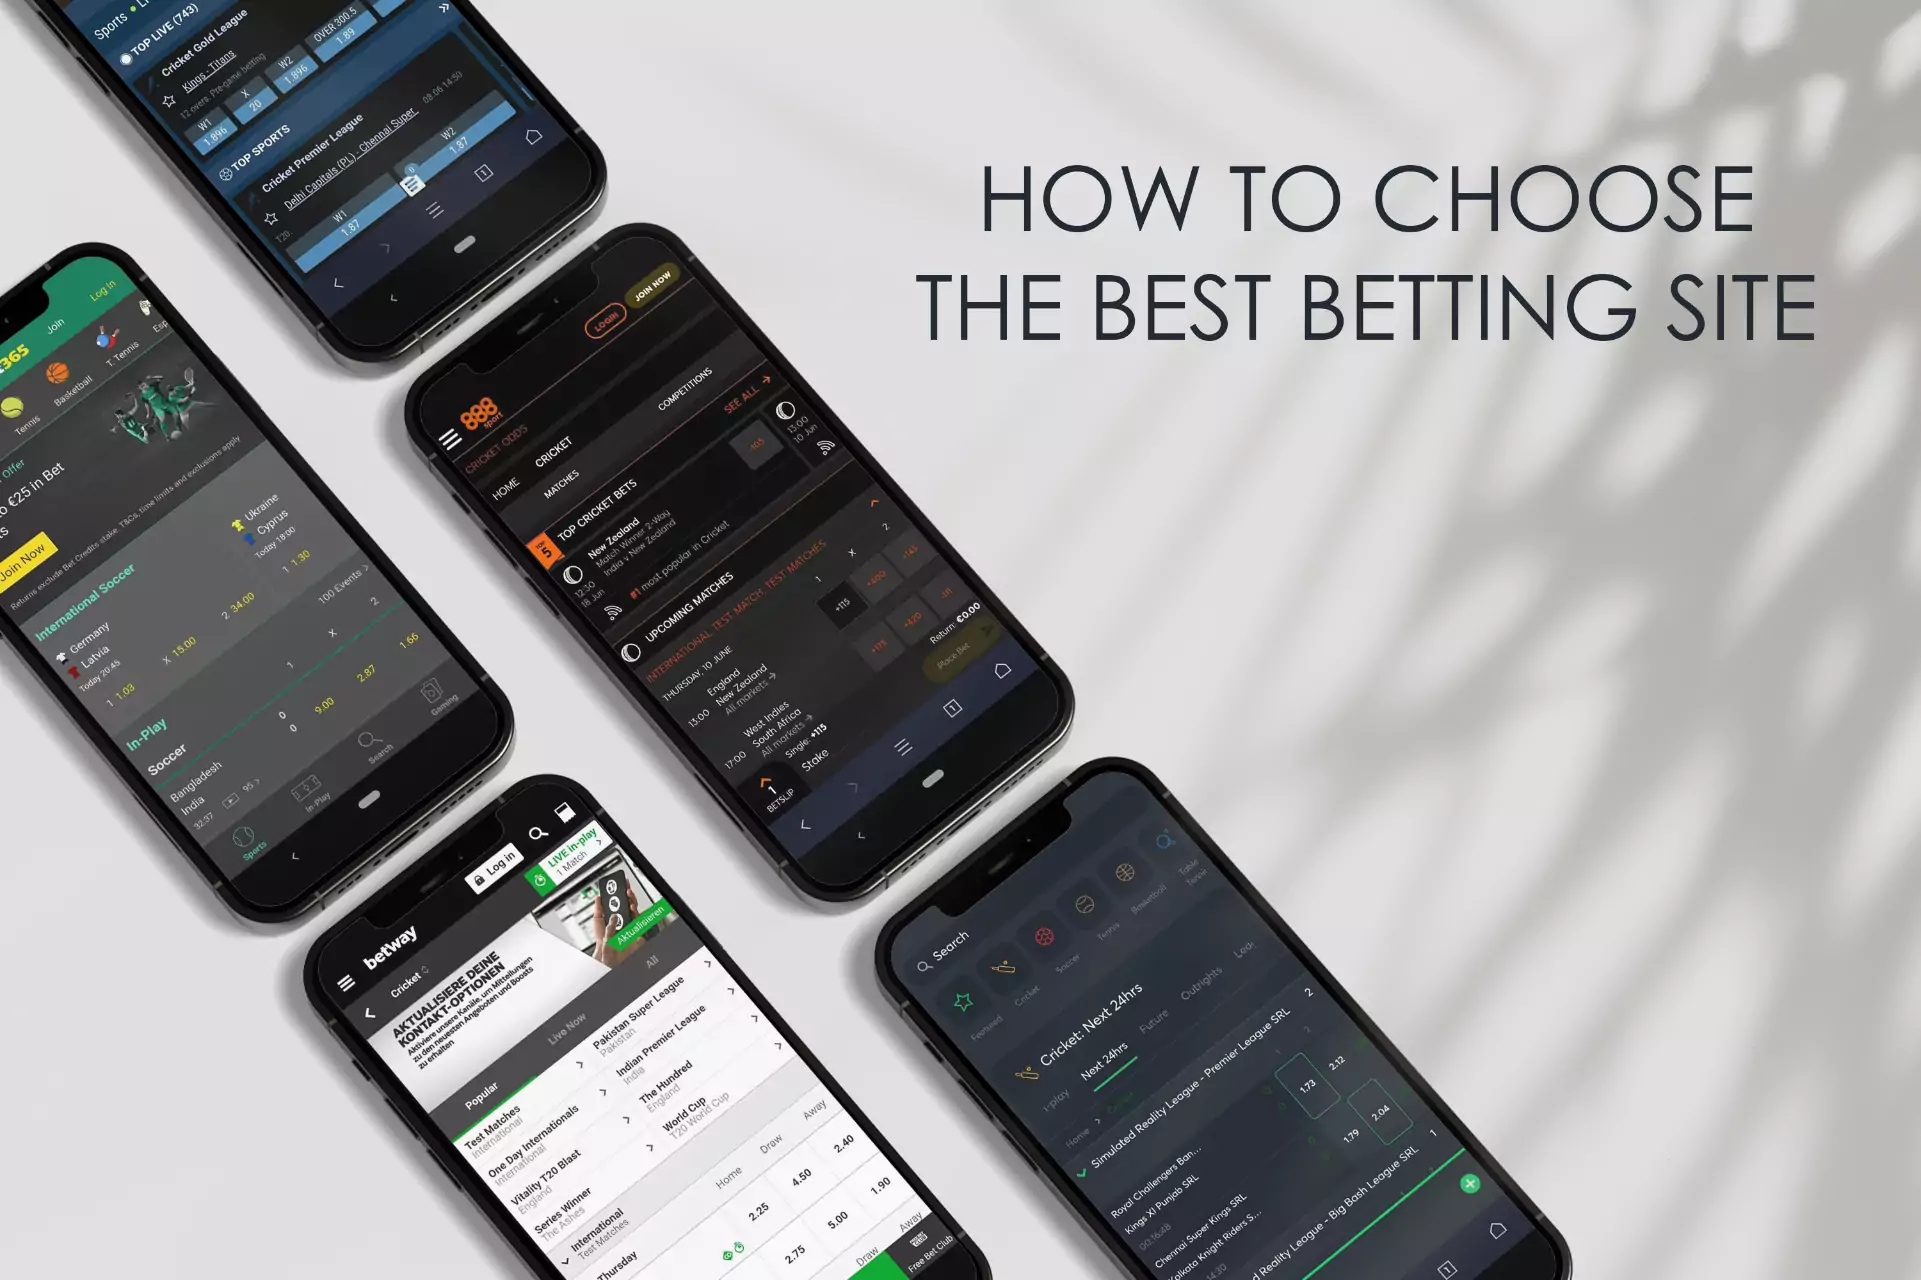 Read our tips and choose the best betting site.